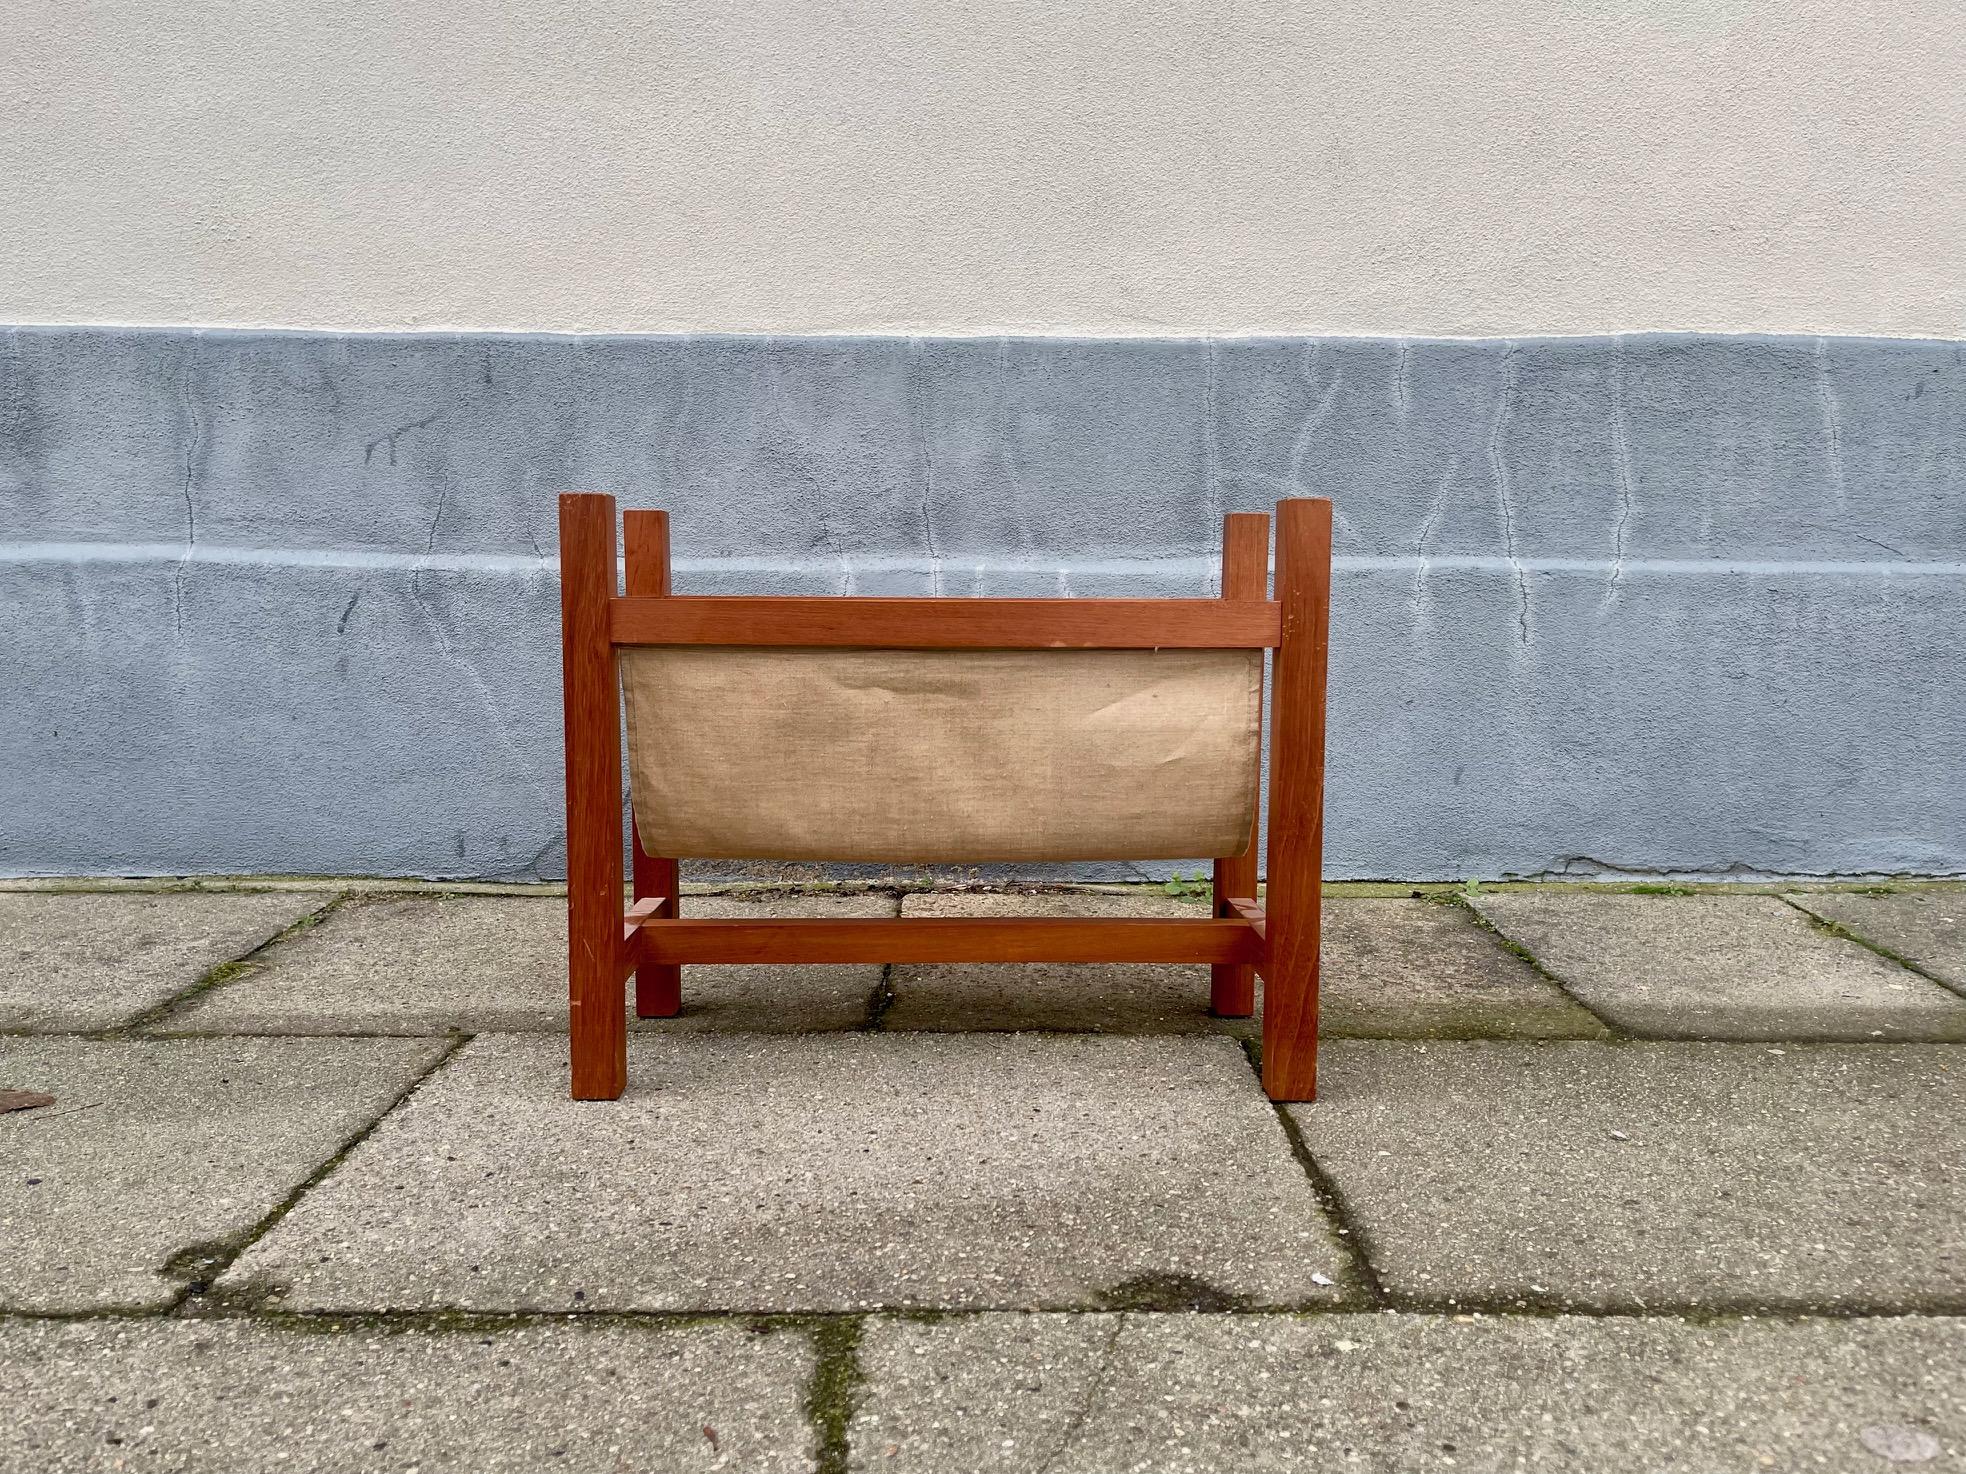 Magazine/Newspaper rack made from teak and natural linen. It was manufactured in Denmark during the 1960s by Skøde Skjern. Nice vintage condition with ware consistent with age and use. Measurements: 50x45x25 cm.